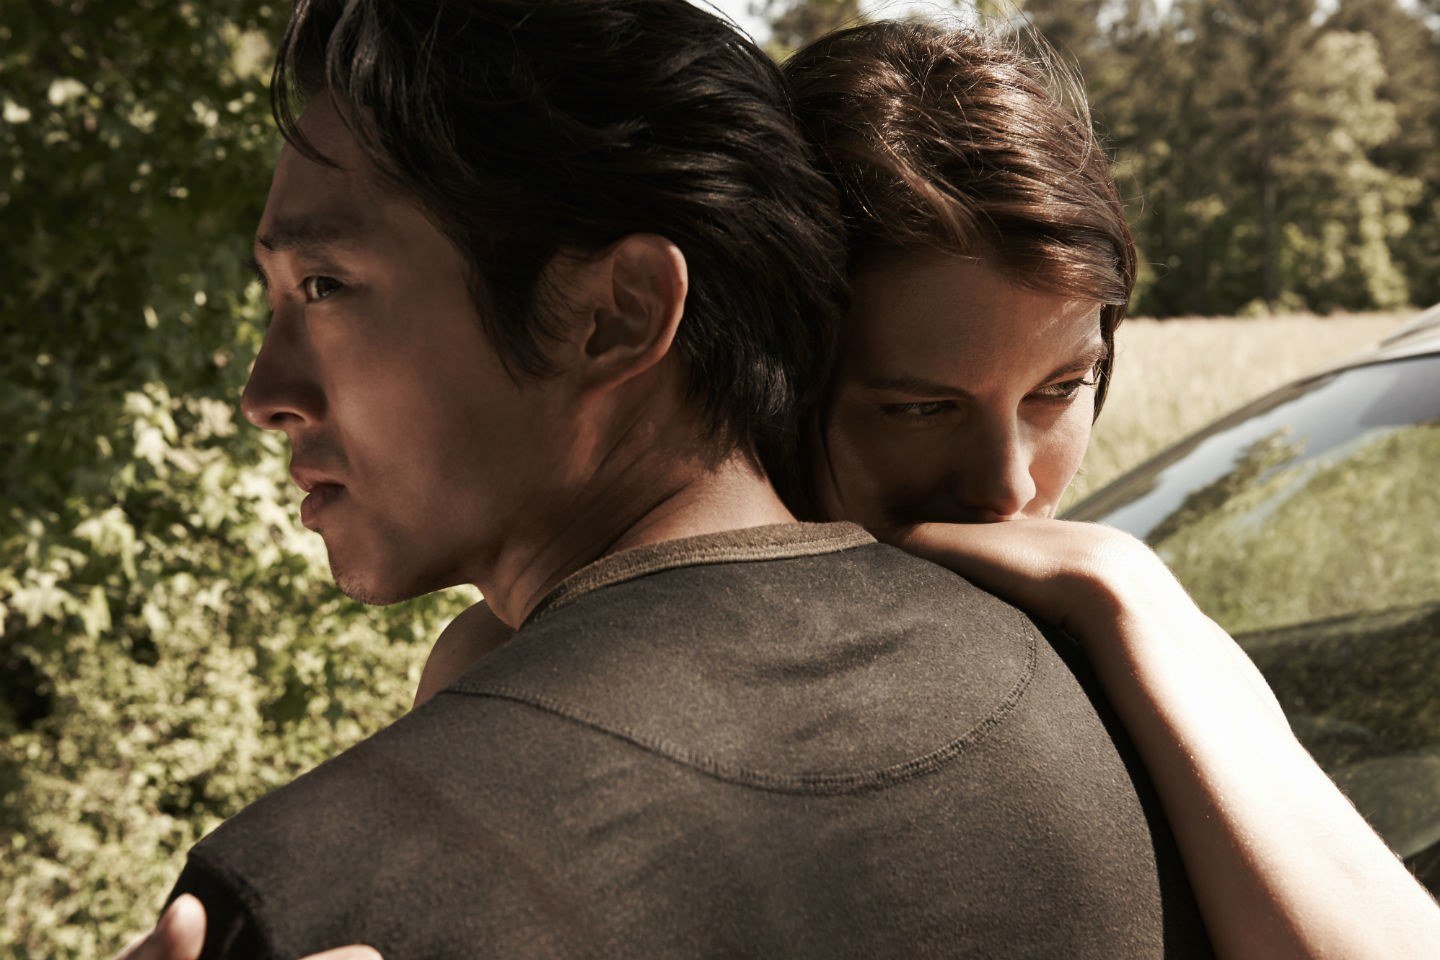 Glenn hugs Maggie while standing in front of trees